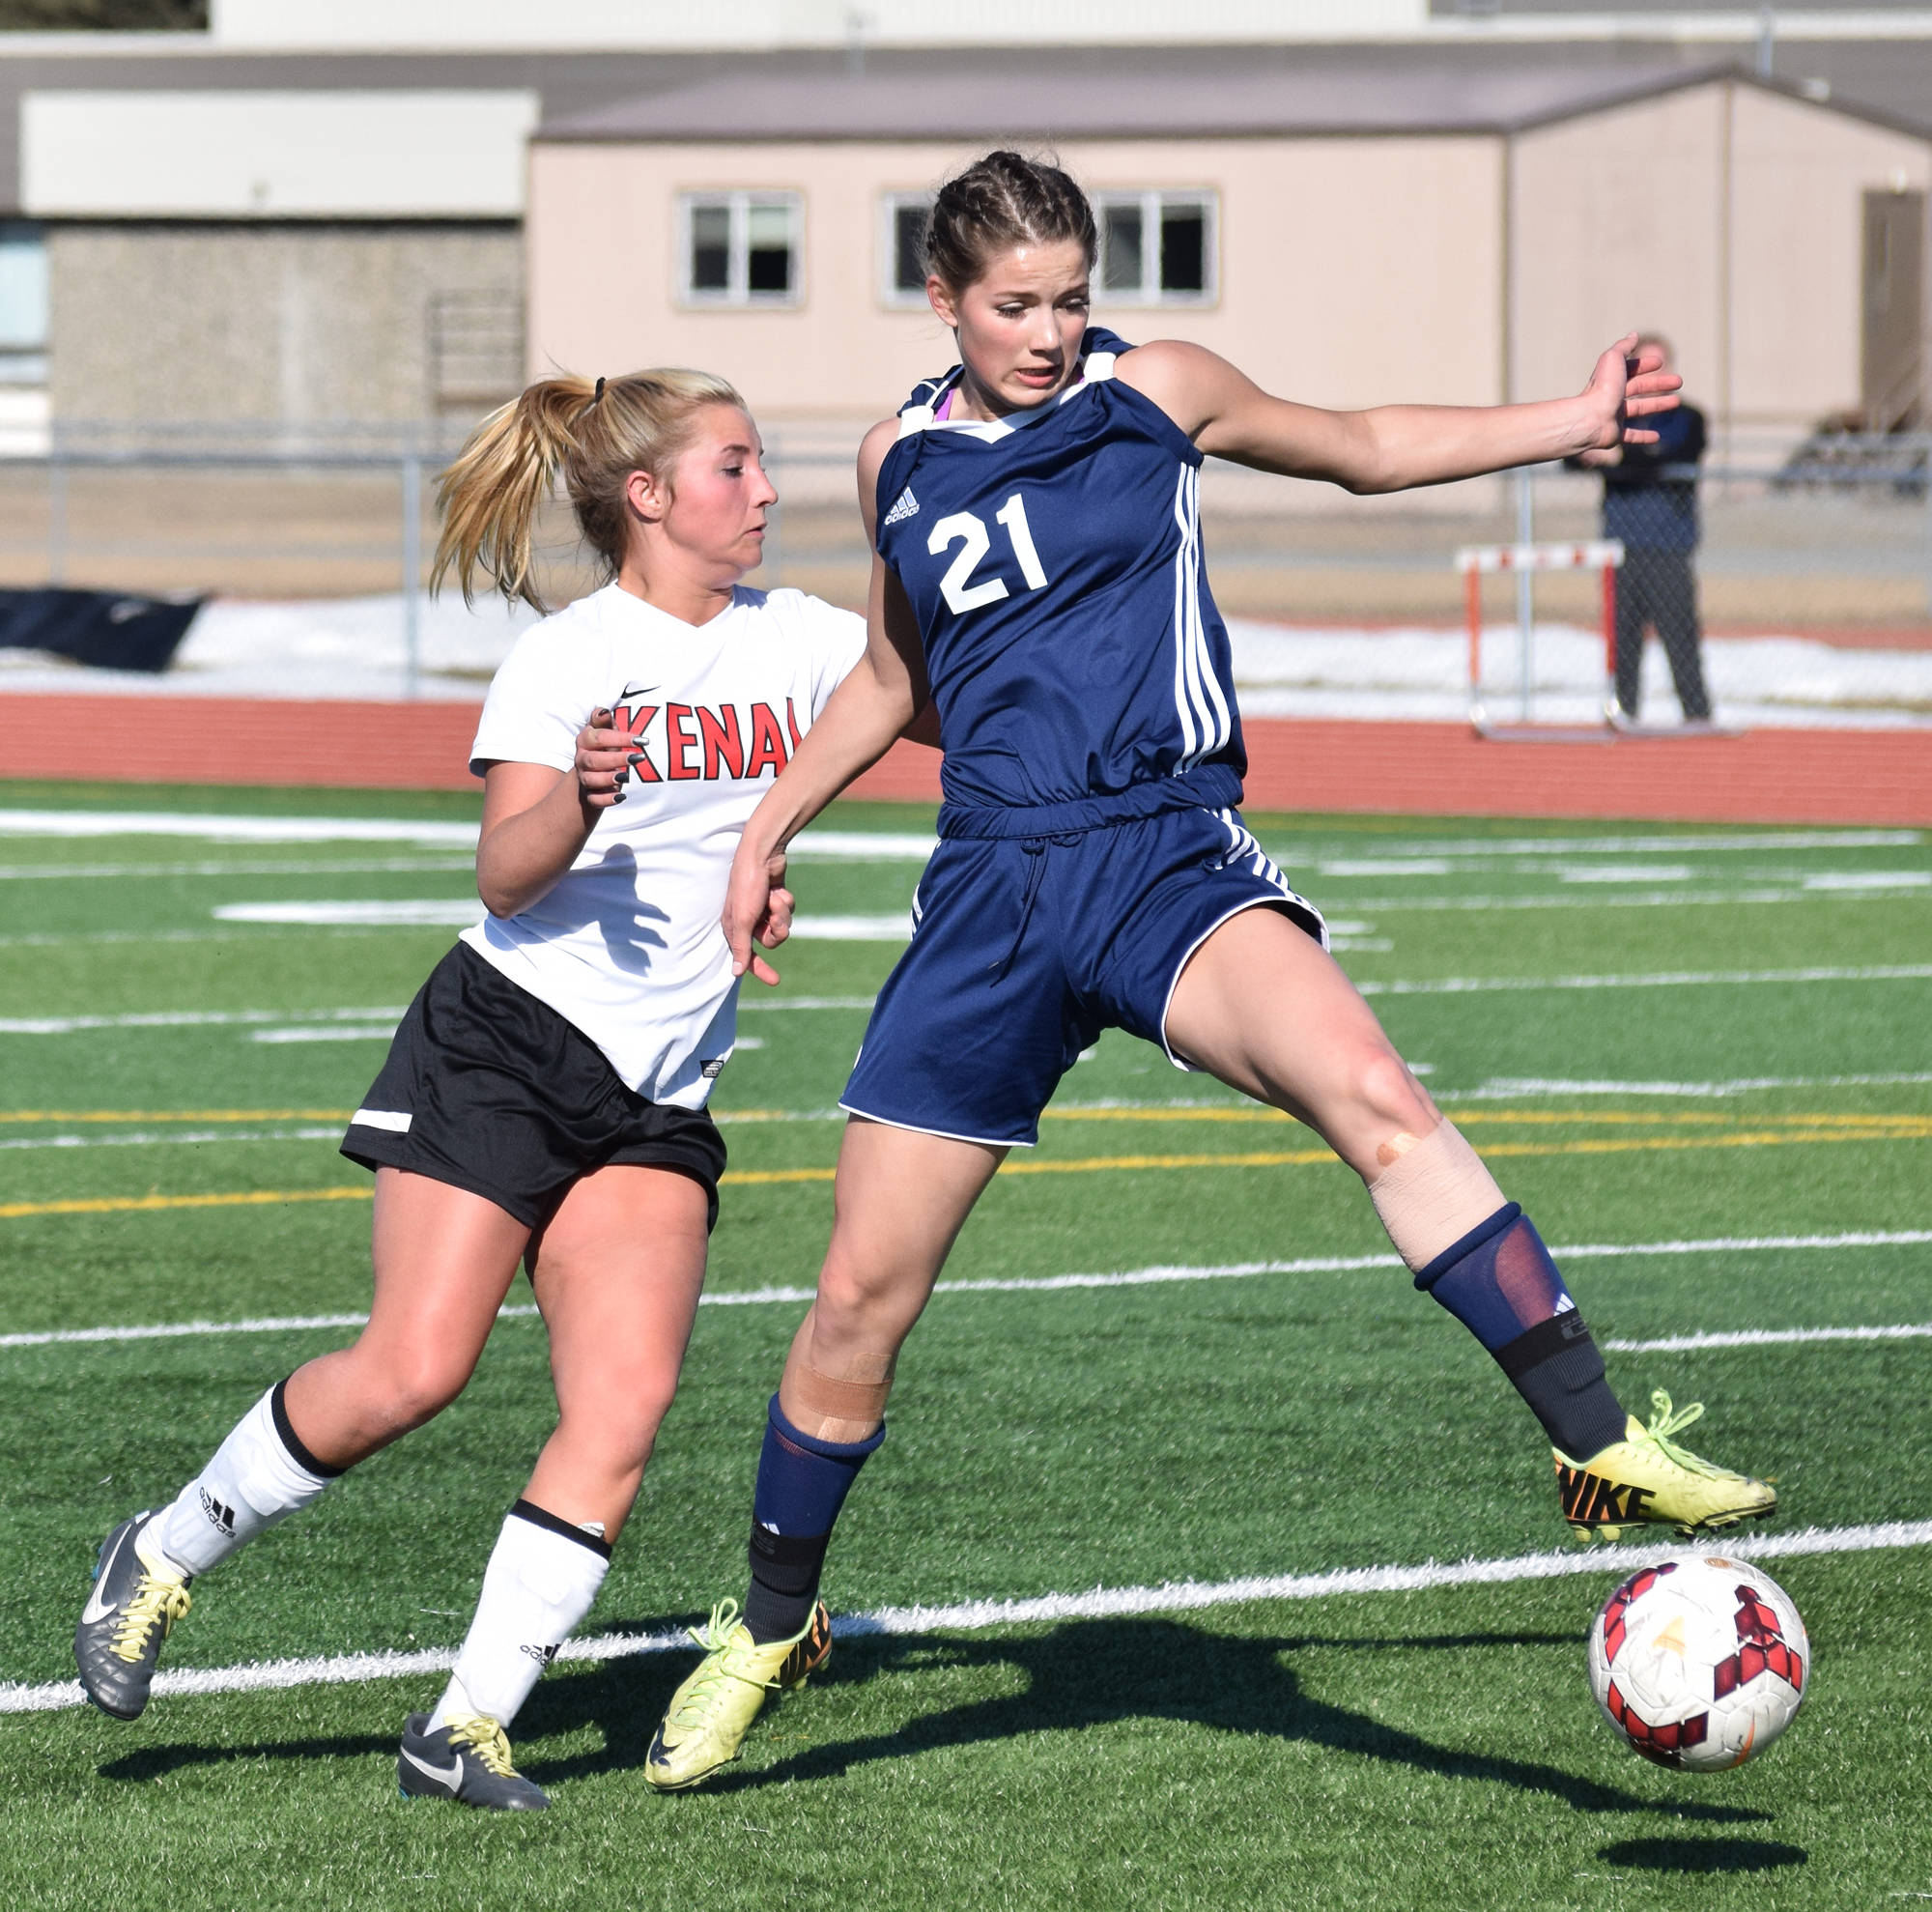 Soldotna’s Ella Stenga (21) works to keep the ball away from Kenai Central’s Annebelle Schneiders in a conference matchup April 18, 2017, at Ed Hollier Field in Kenai. (Photo by Joey Klecka/Peninsula Clarion)